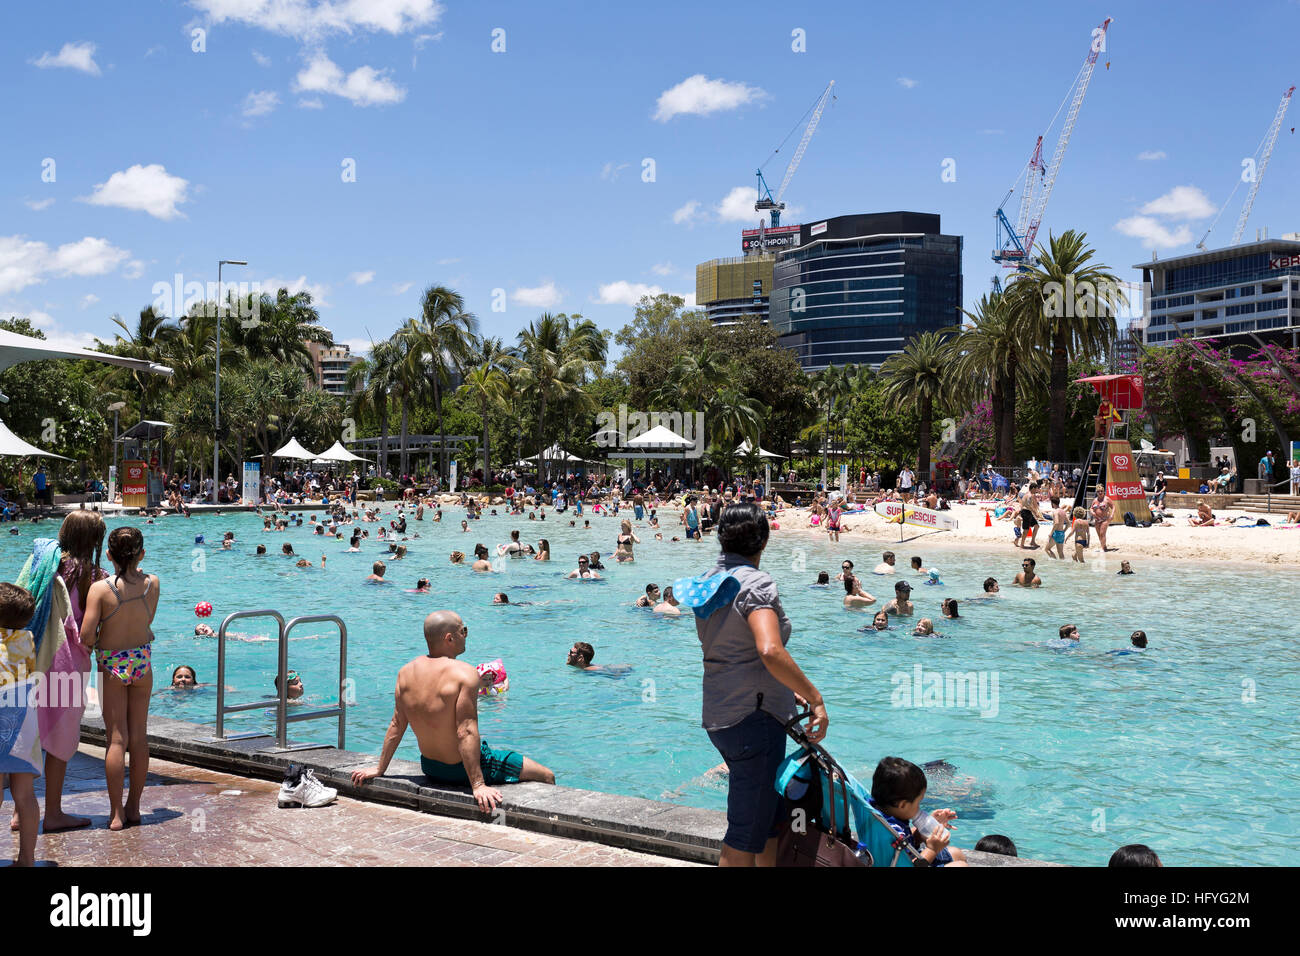 Hot day at the man made beach at the South Bank Parklands in Brisbane, Australia Stock Photo